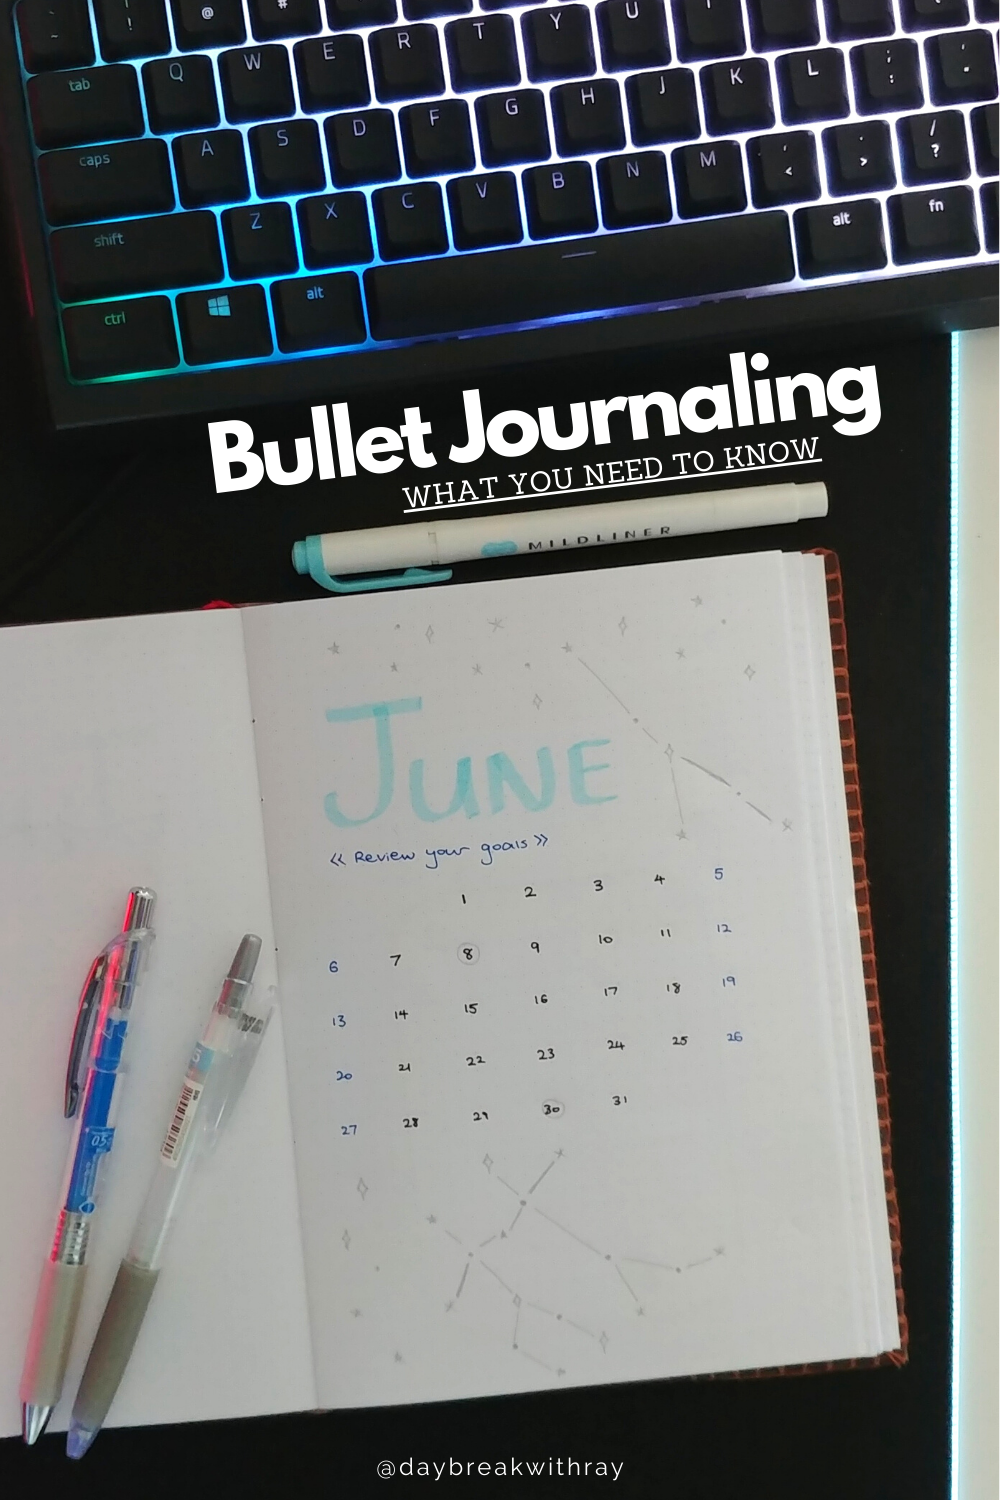 New to Bullet Journaling Here's what you need to know